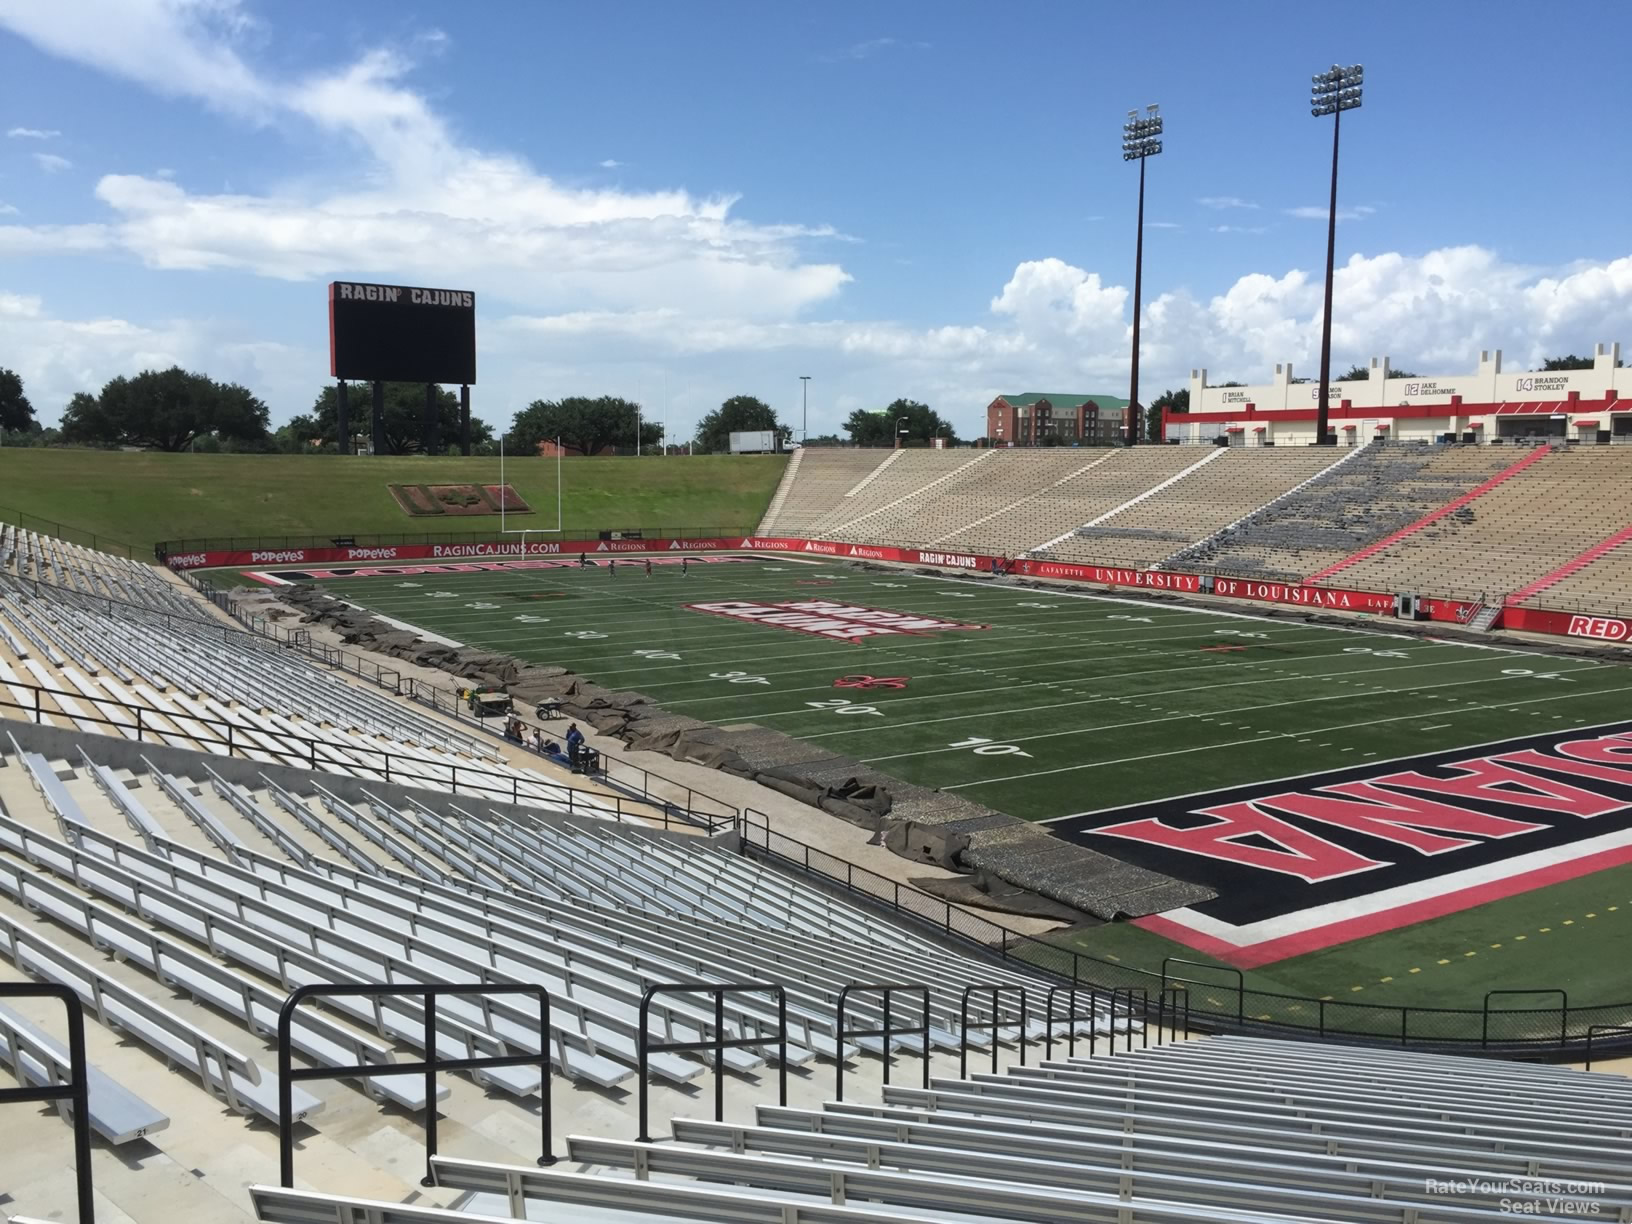 section y, row 30 seat view  - cajun field